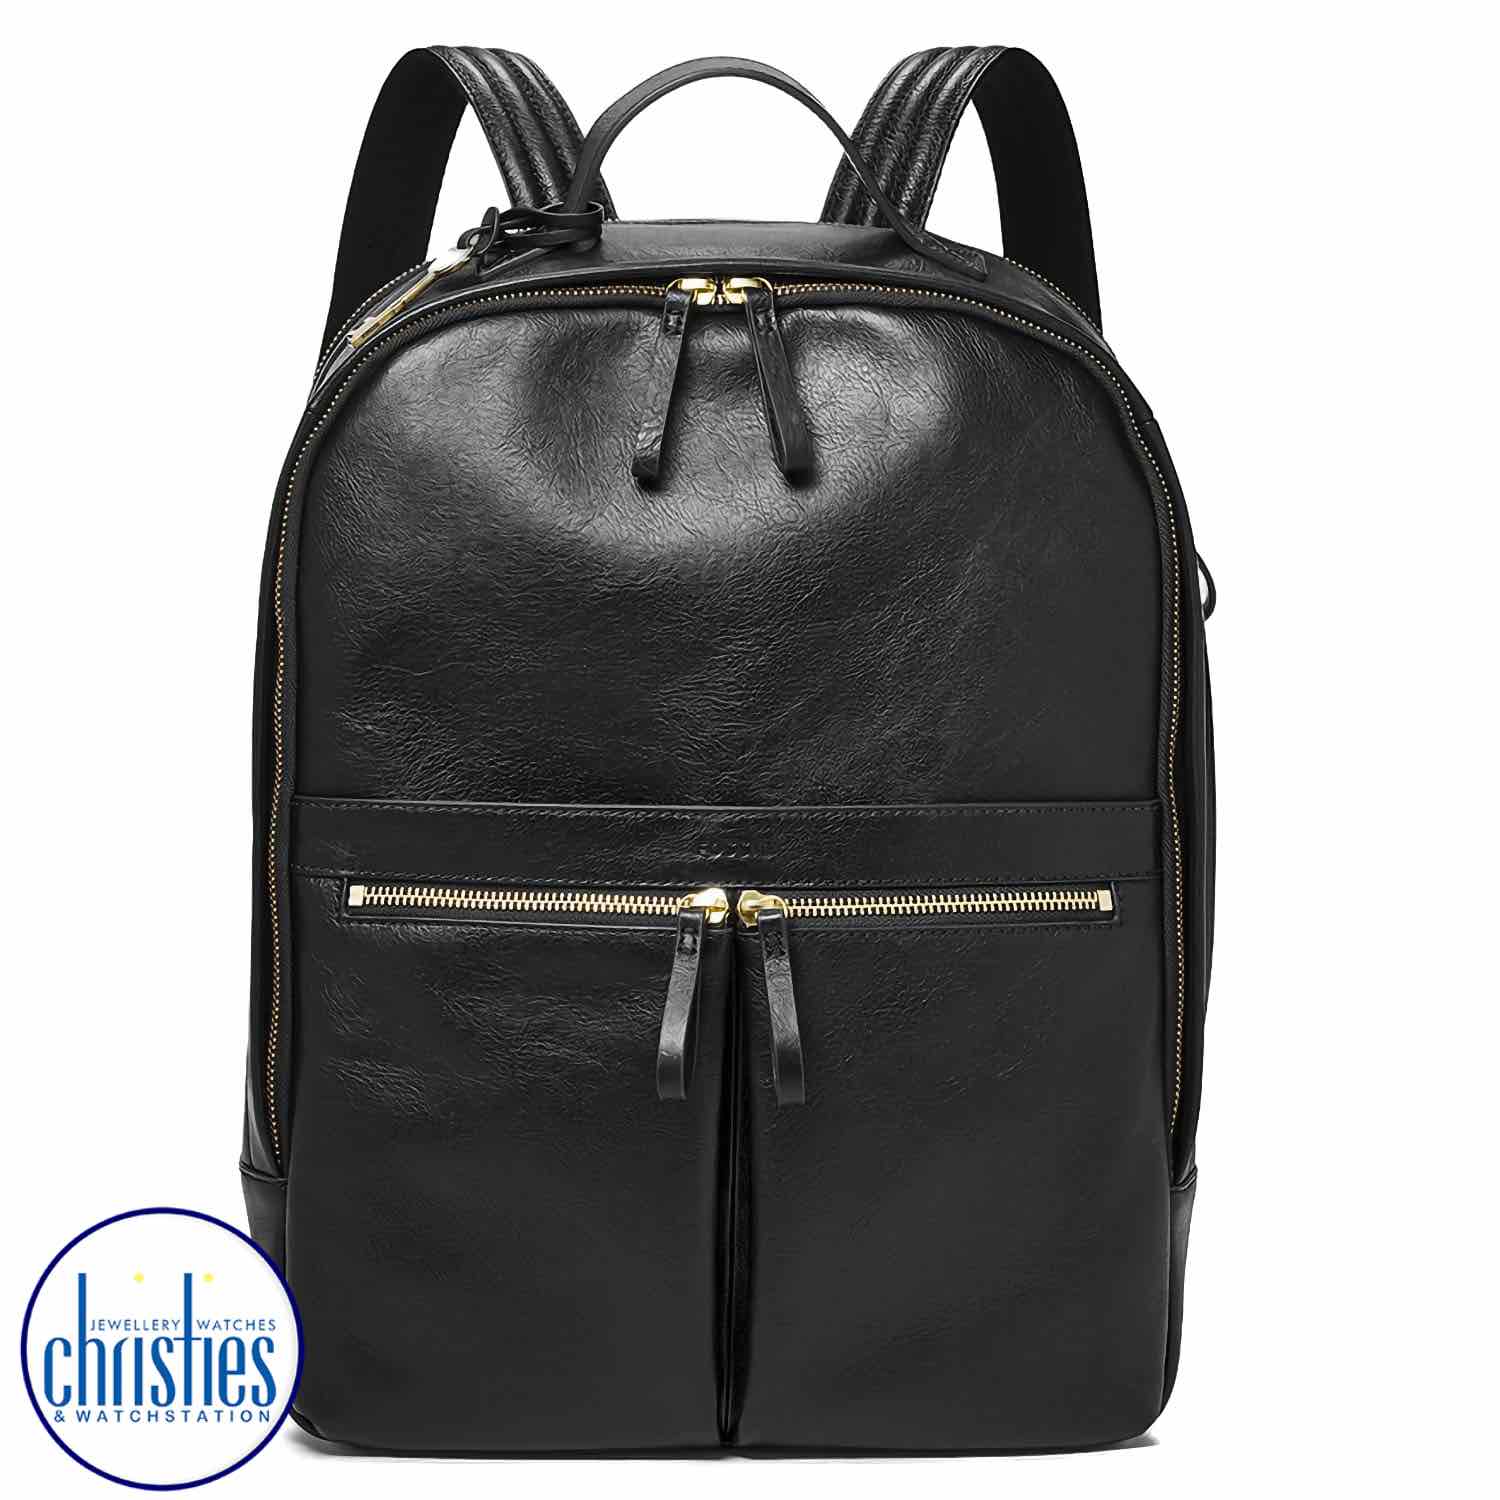 ZB1325001 Fossil Tess Laptop Backpack. Carry an ultimate expression of Fossil's style and design evolution with the black-coloured backpack.